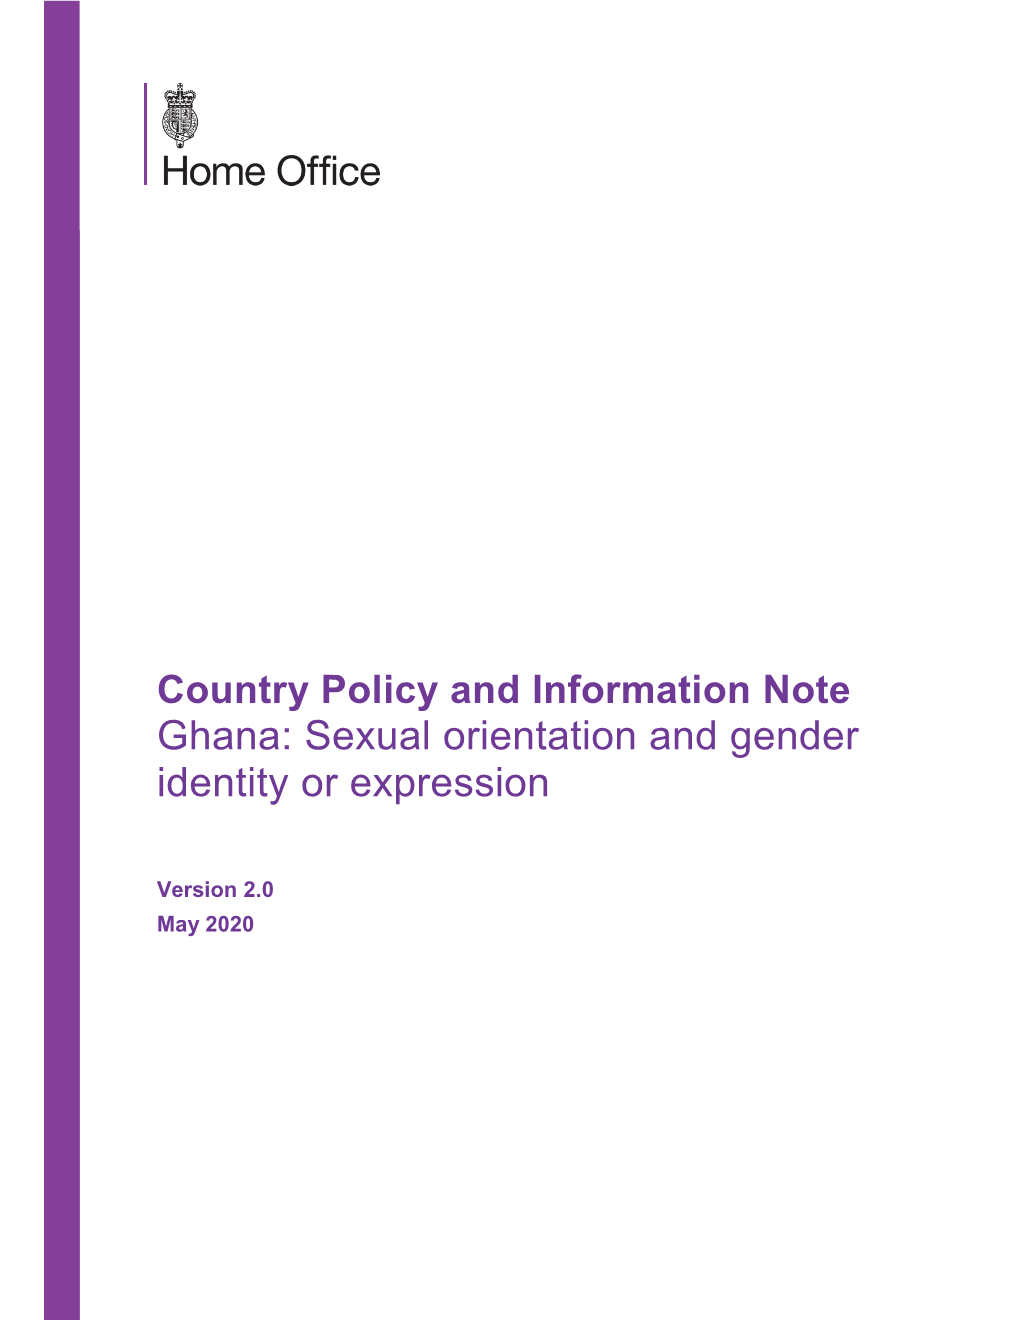 Sexual Orientation and Gender Identity Or Expression, Ghana